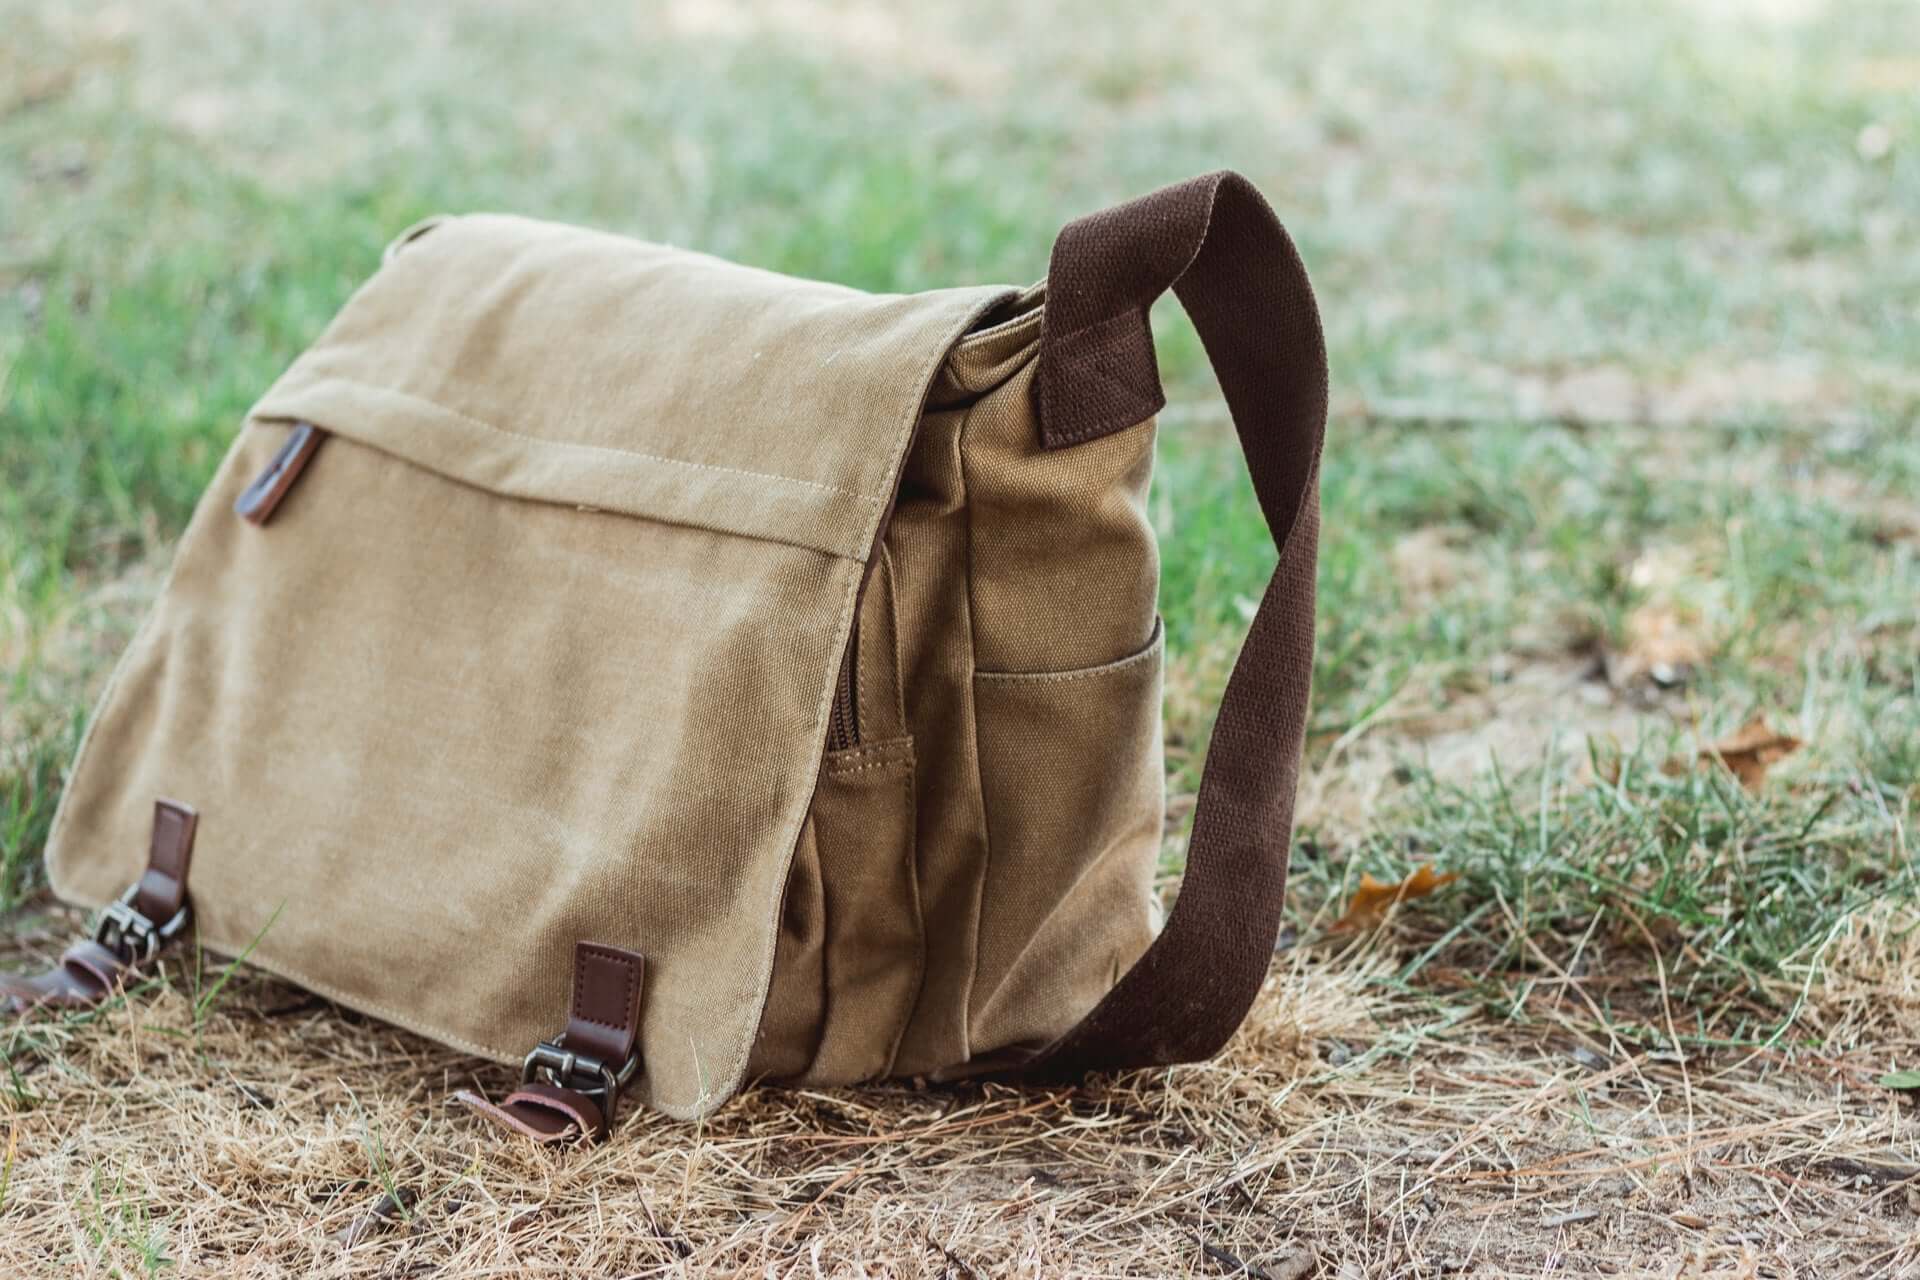 A canvas messenger bag sitting in the grass.